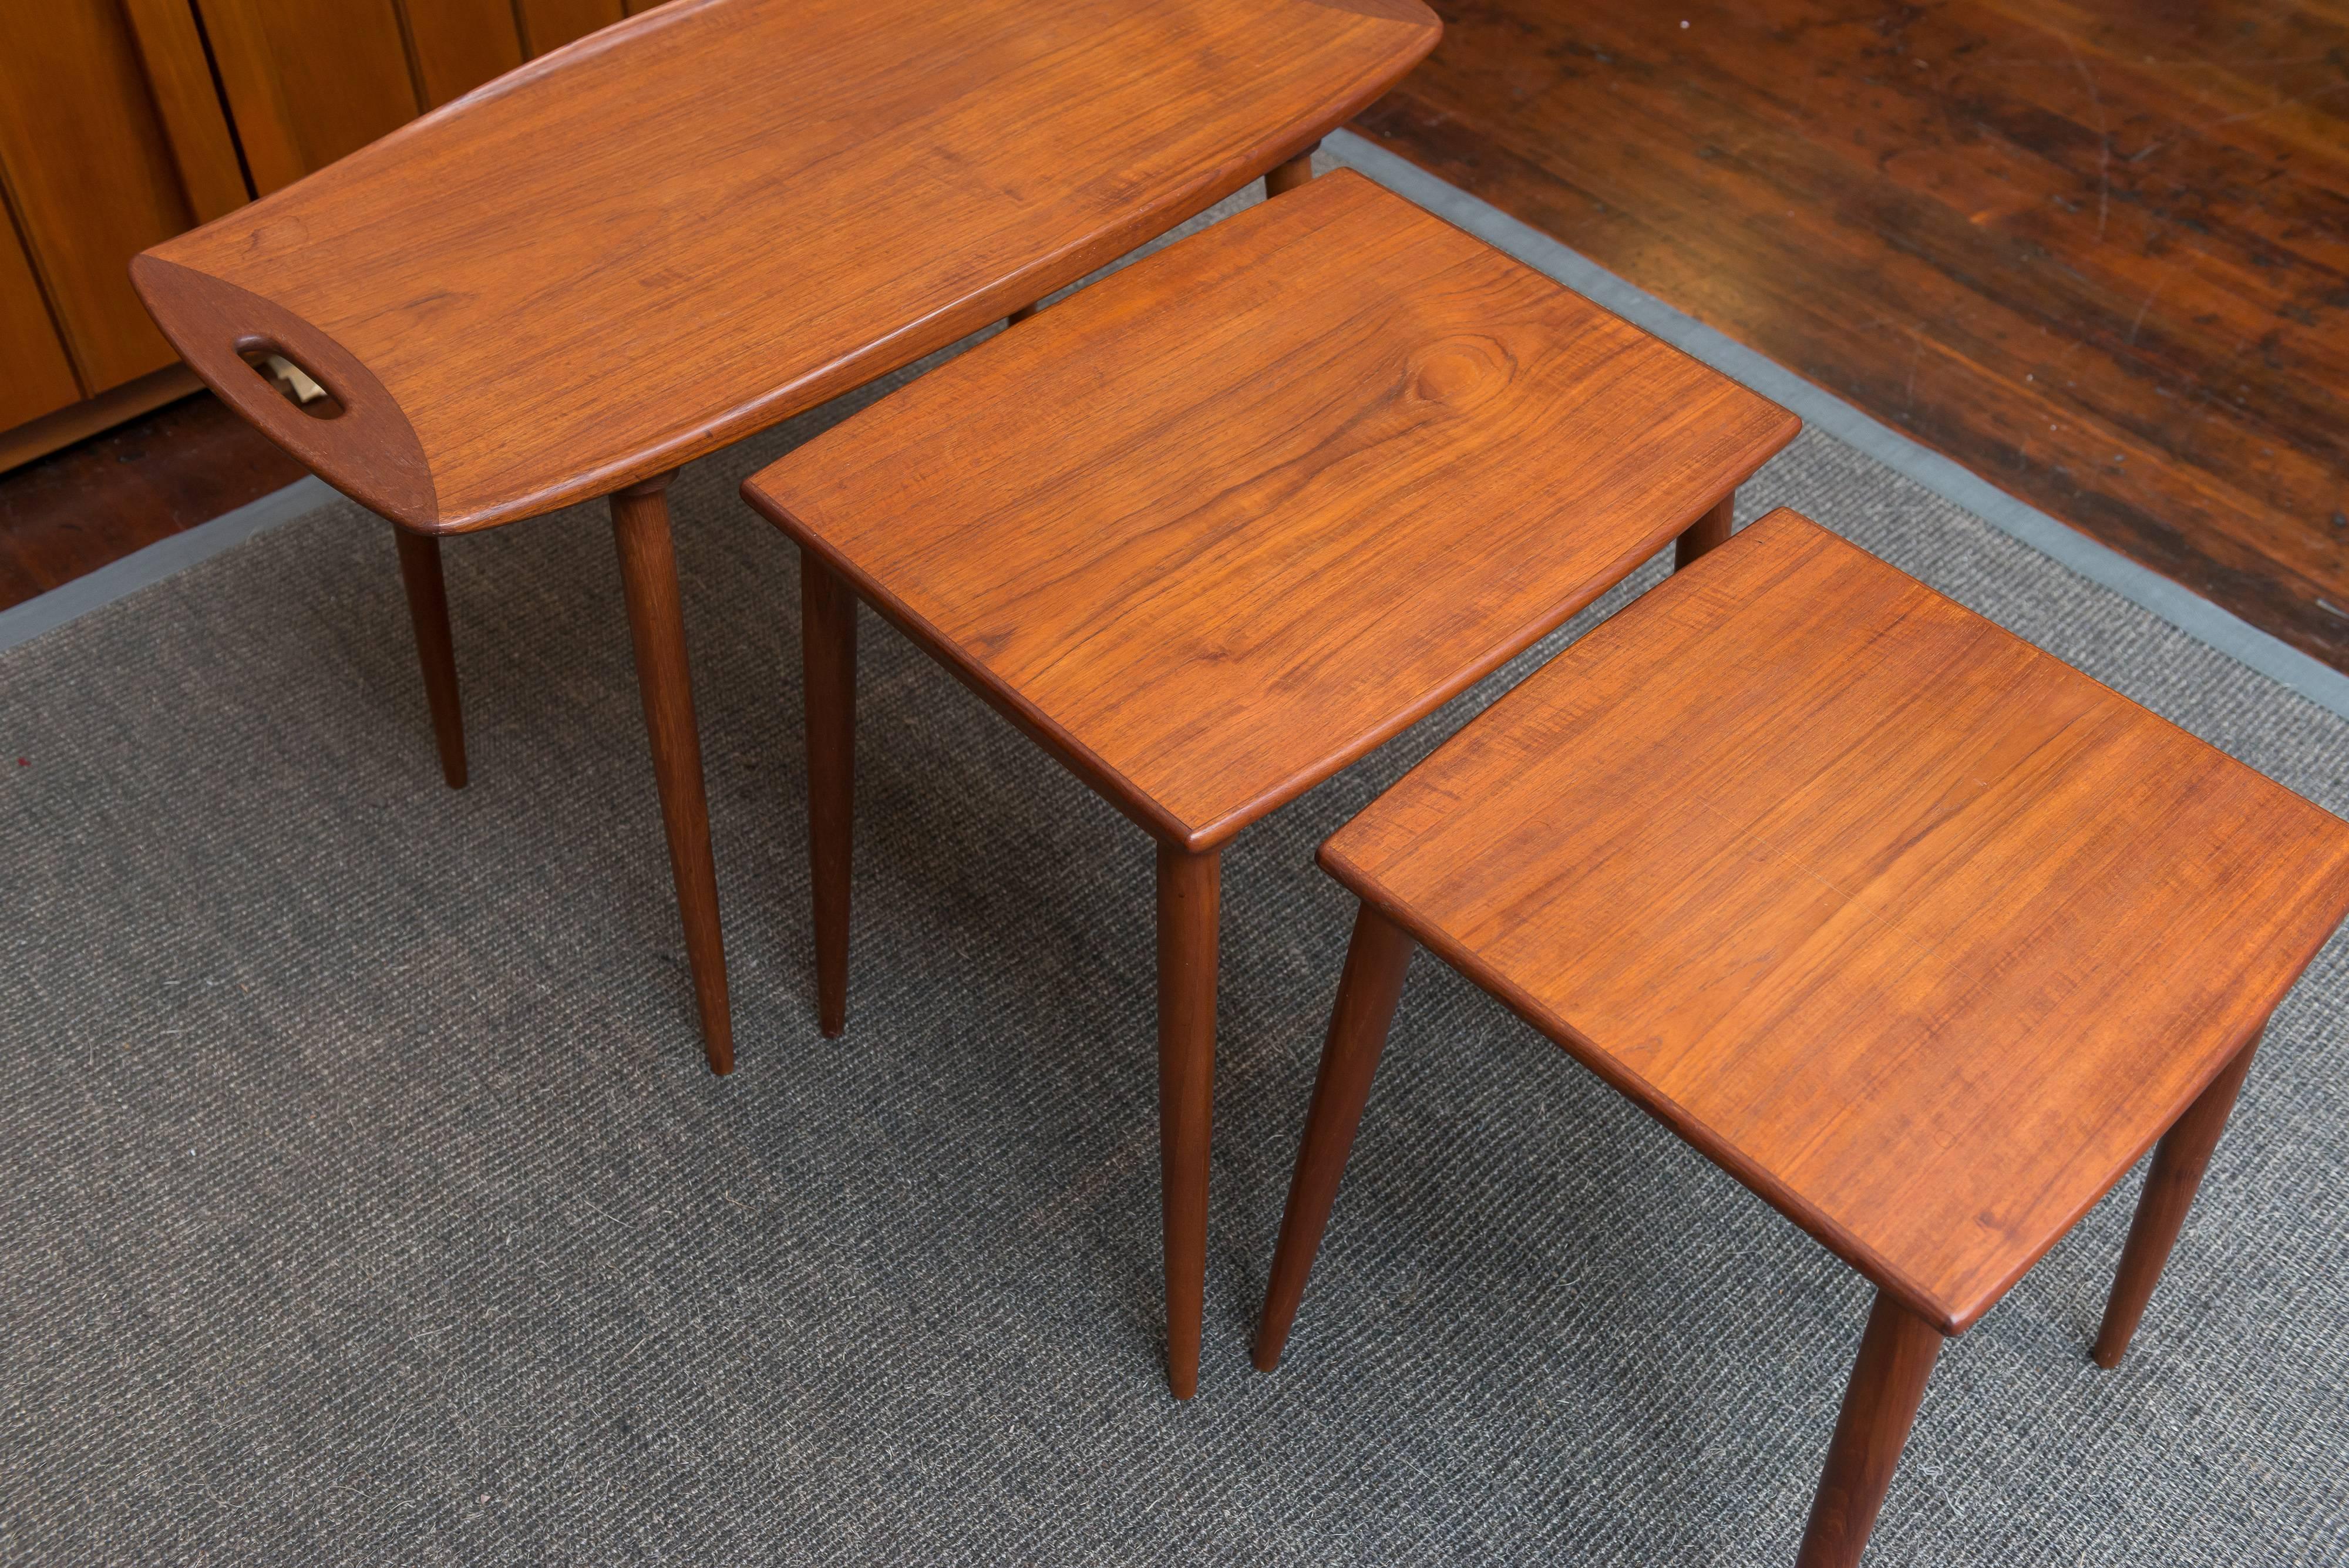 Mid-20th Century Jens Quistgaard Nesting Tables